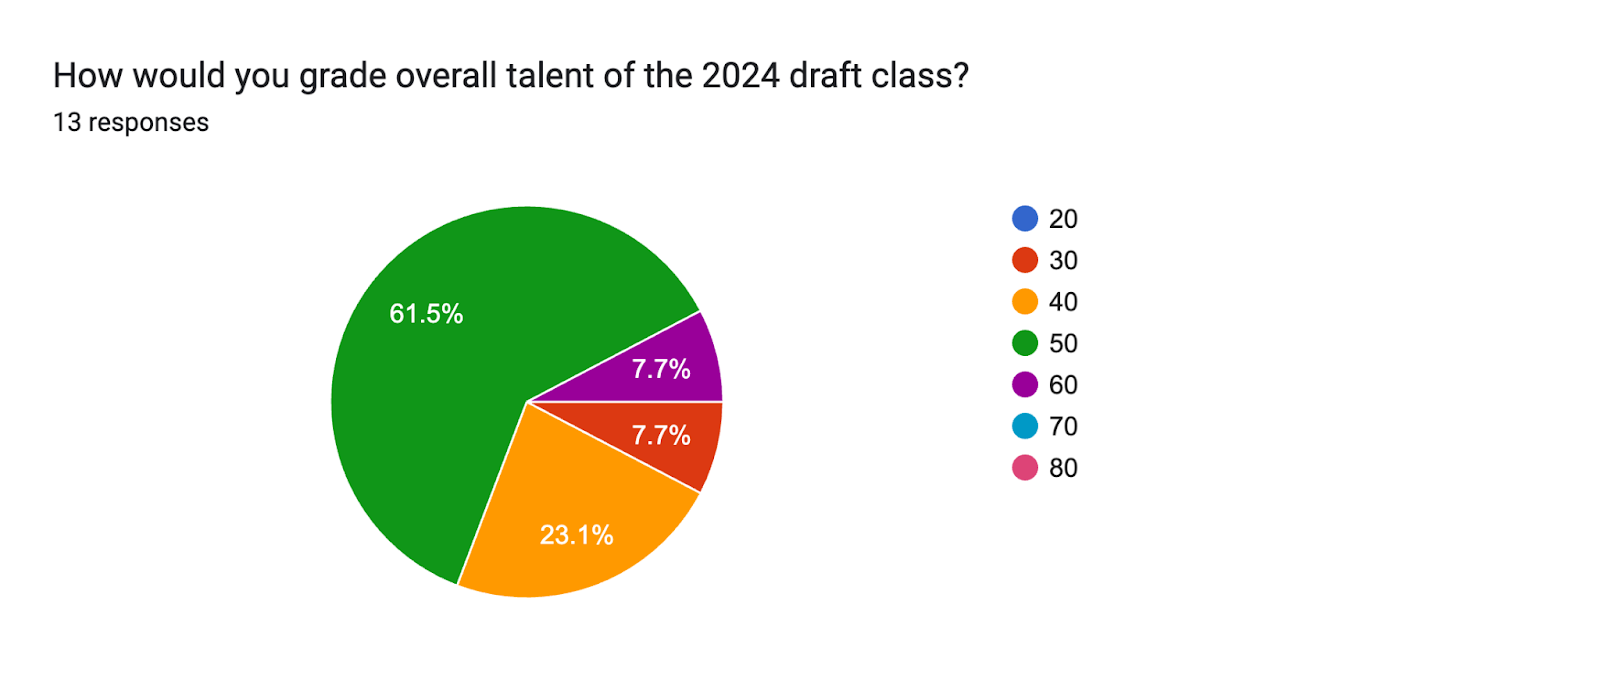 Forms response chart. Question title: How would you grade overall talent of the 2024 draft class?. Number of responses: 13 responses.